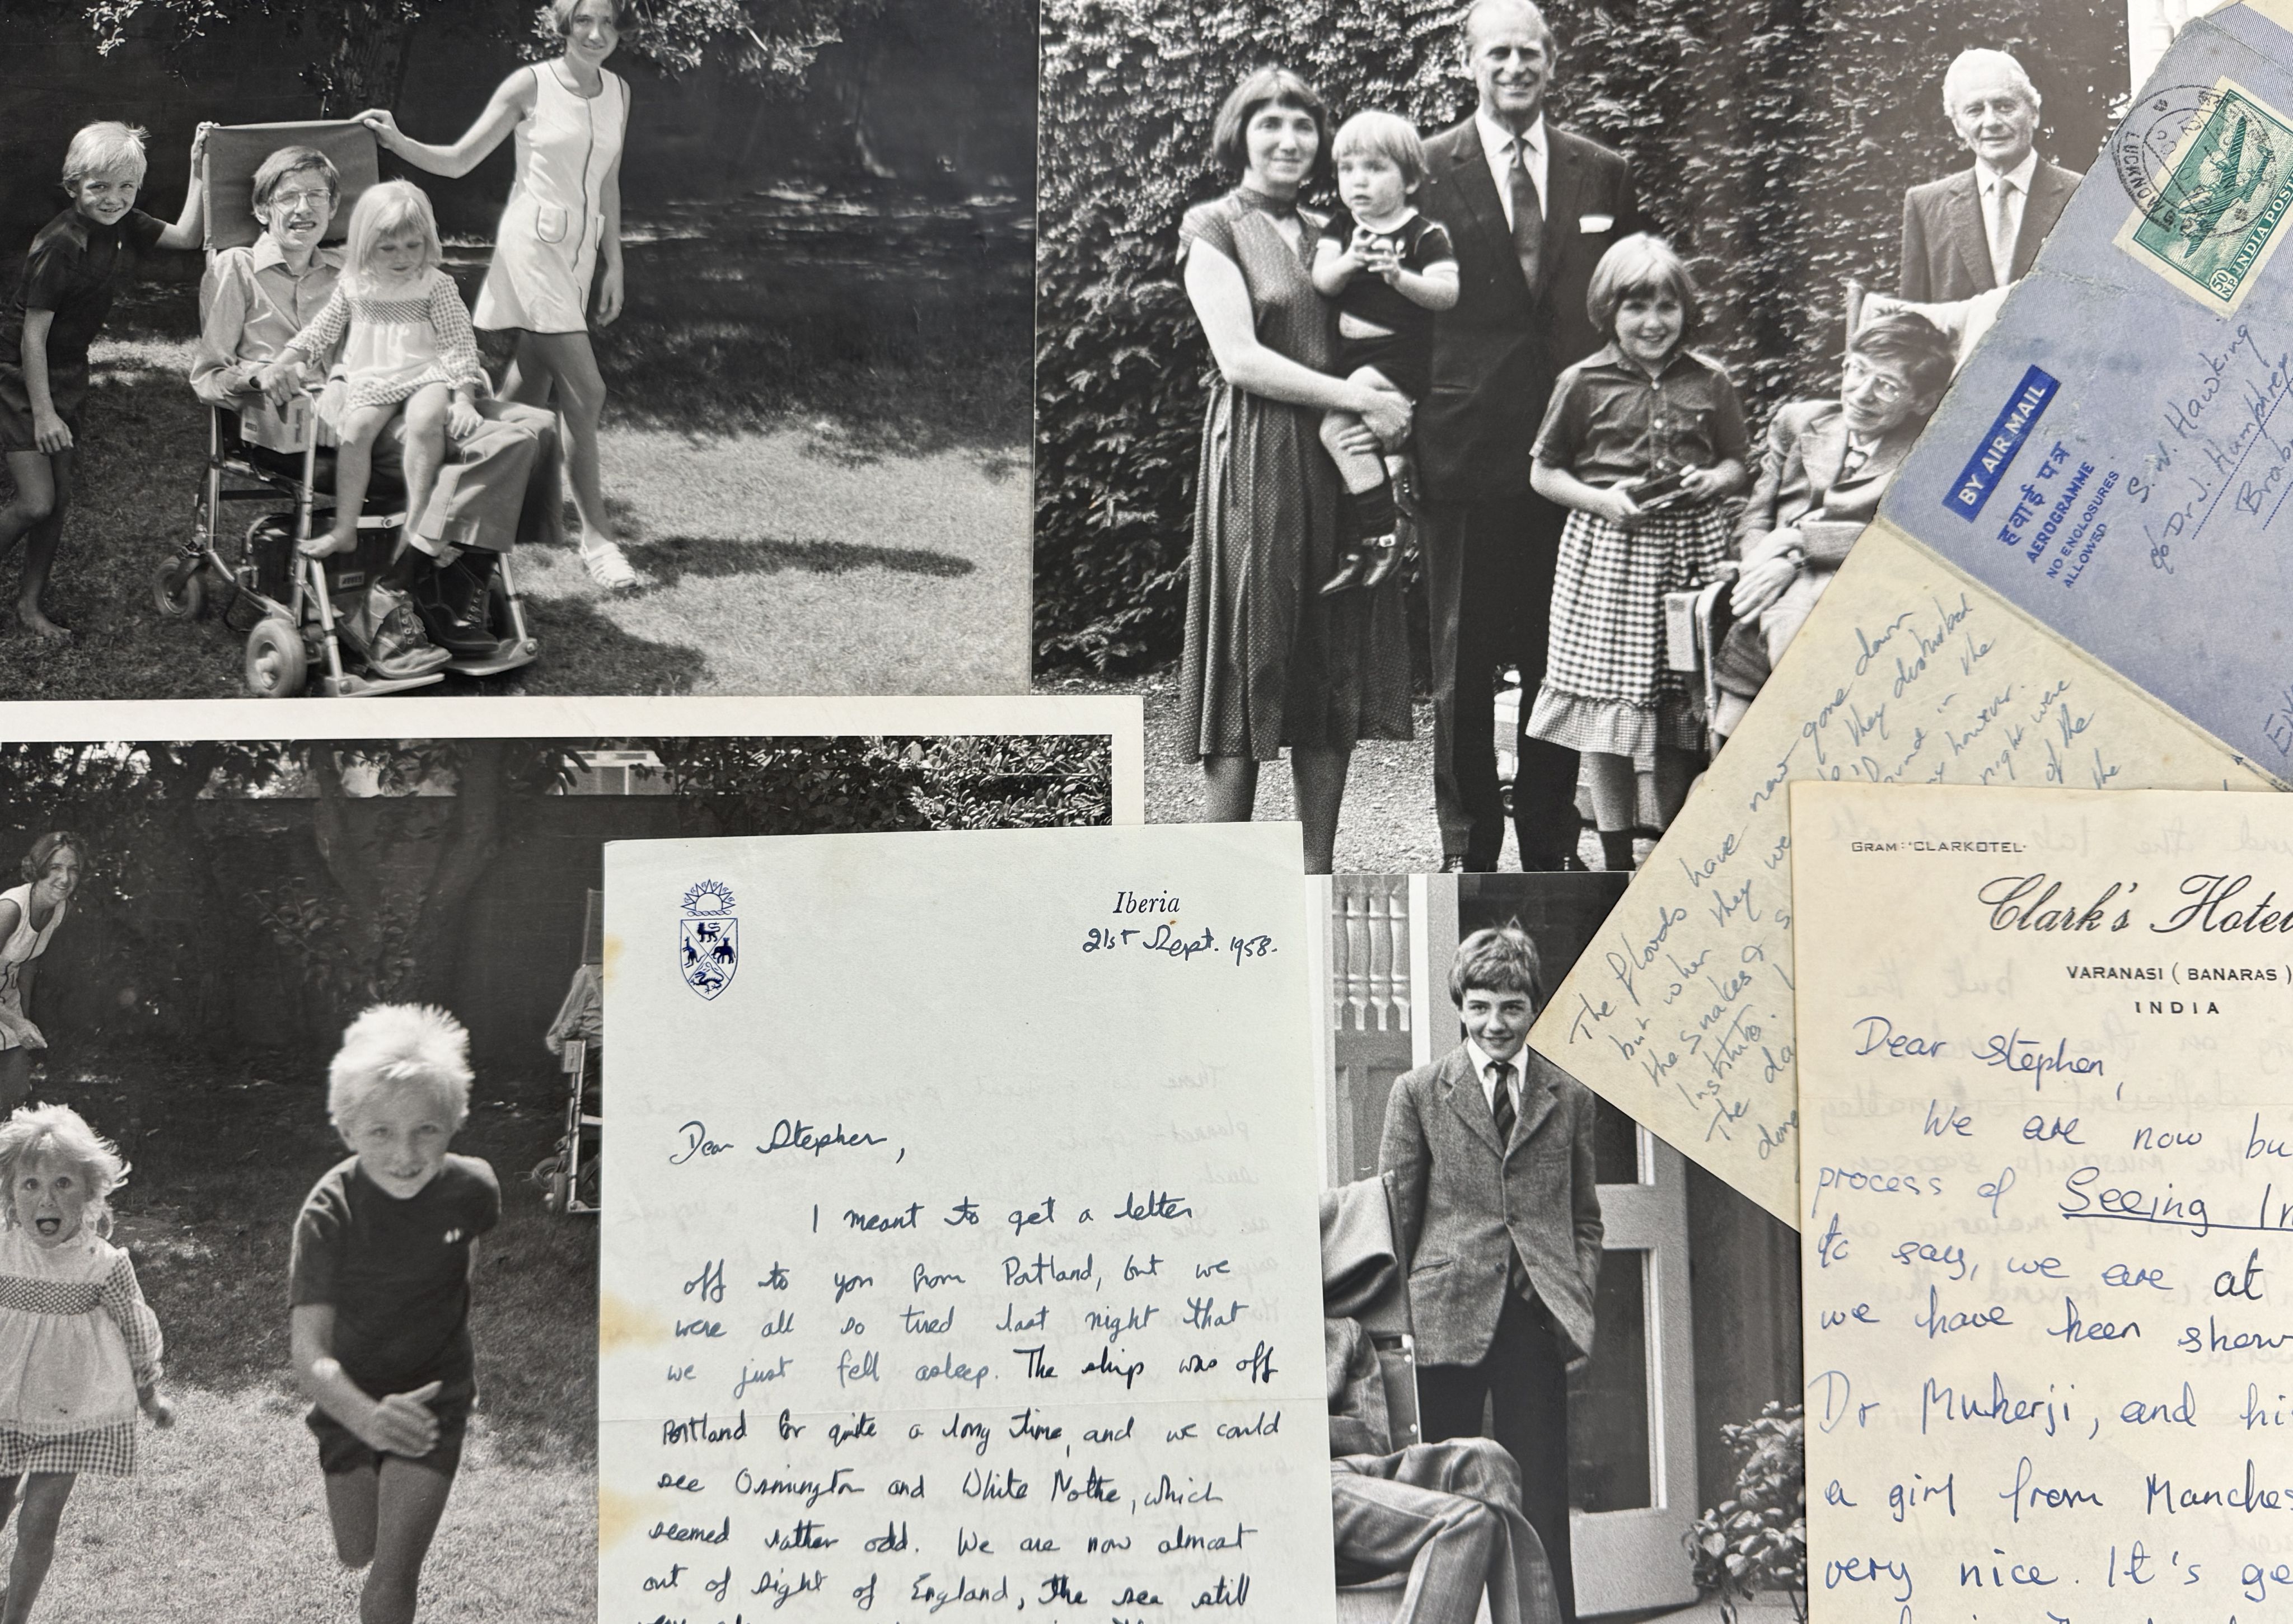 Family photos and letters from the Hawking Archive at Cambridge University Library